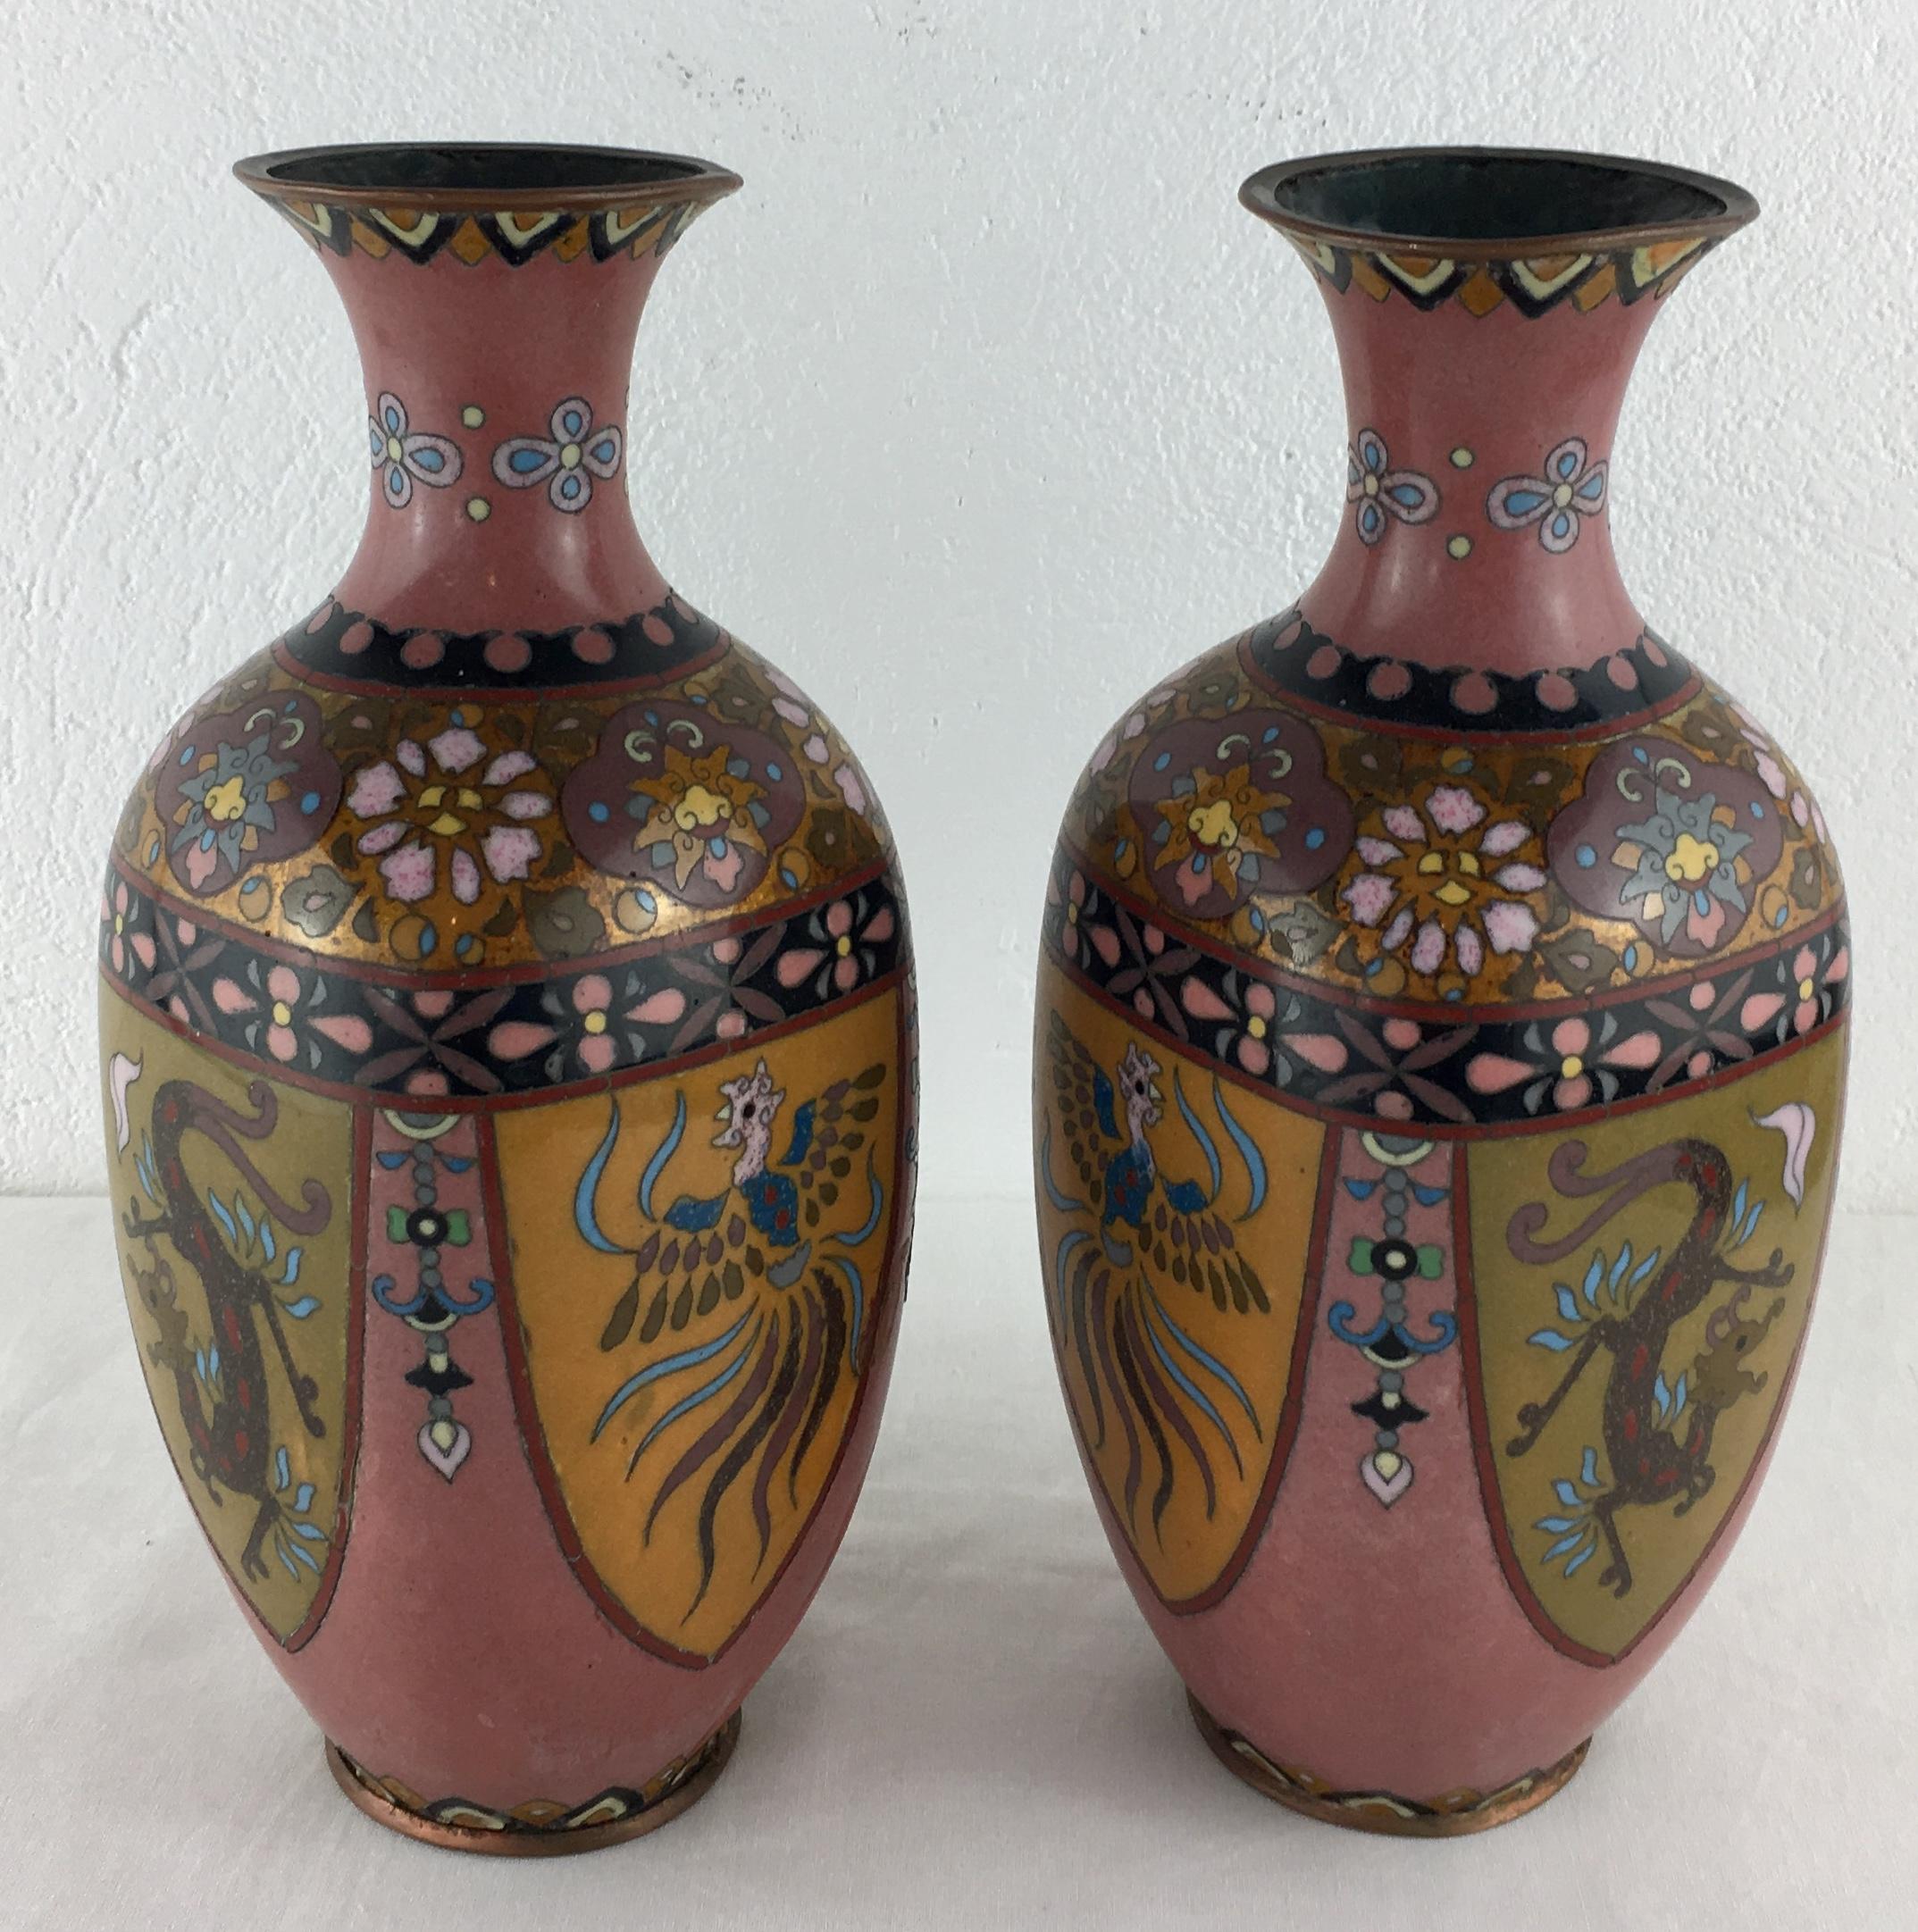 Vibrantly colored and intricately detailed pair of French Art Deco cloisonné vases with floral, geometric and animal patterns (resembles a phoenix).

Measures: 9 1/4